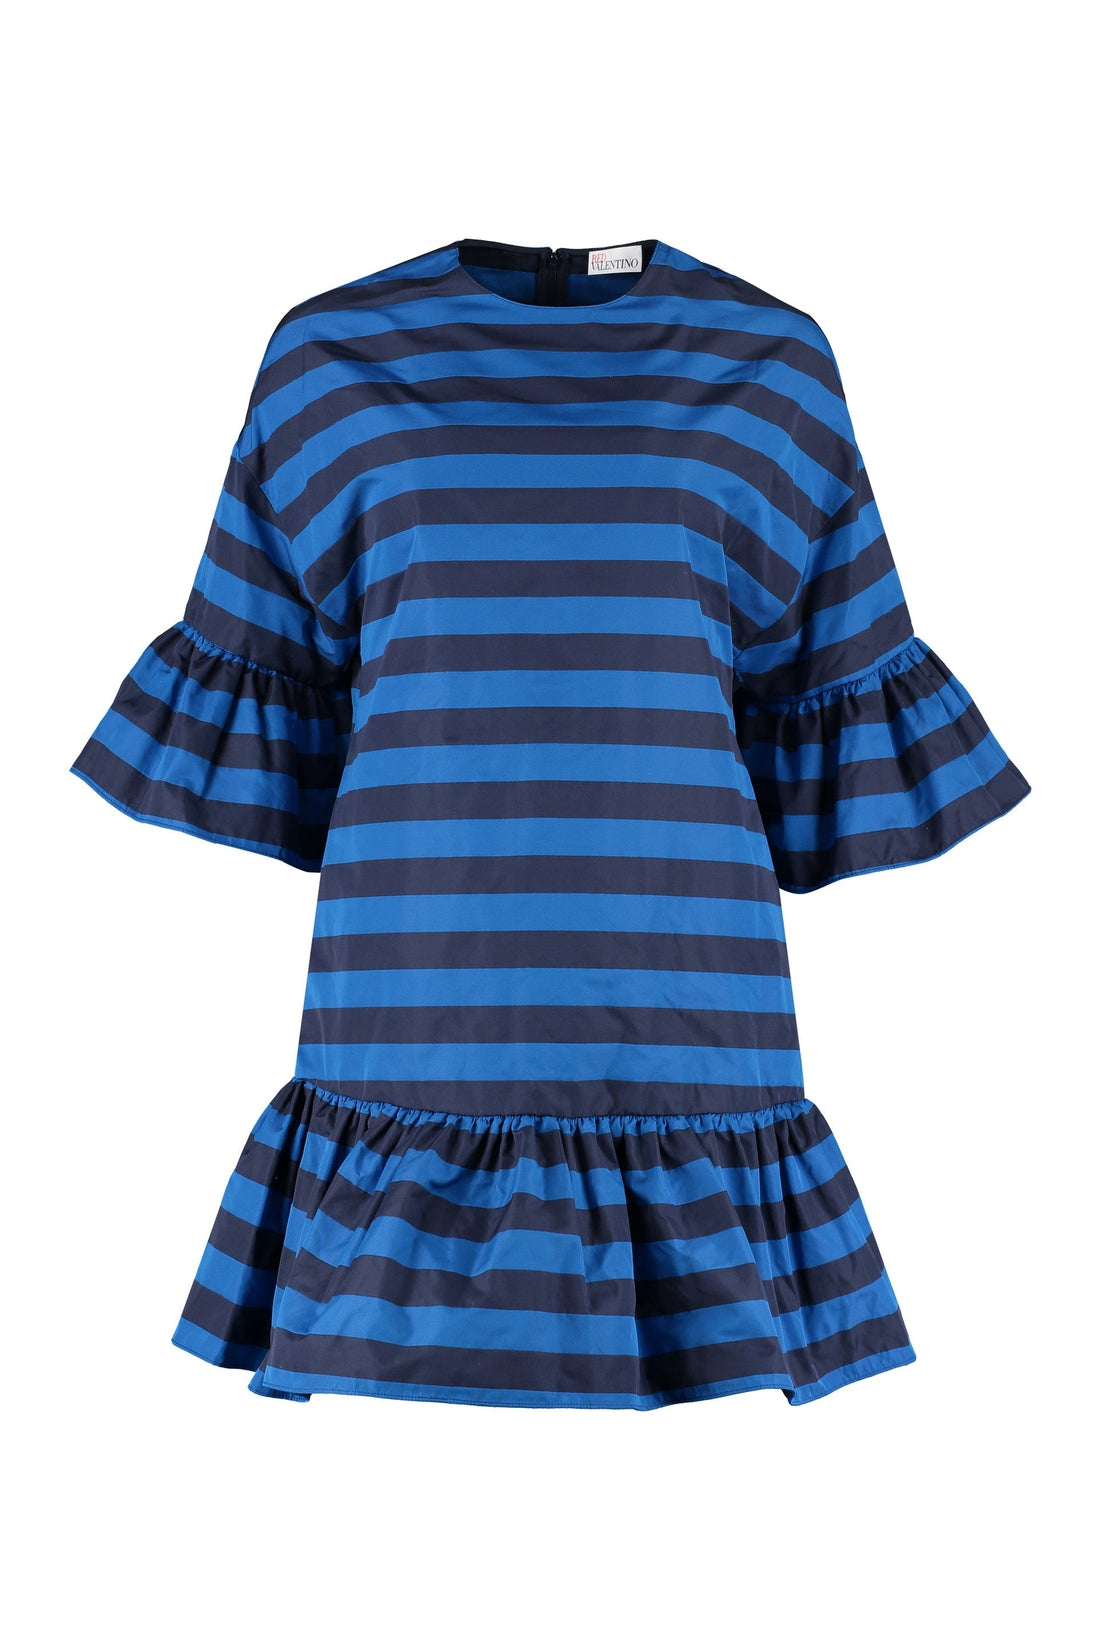 RED VALENTINO-OUTLET-SALE-Ruffled mini dress-ARCHIVIST